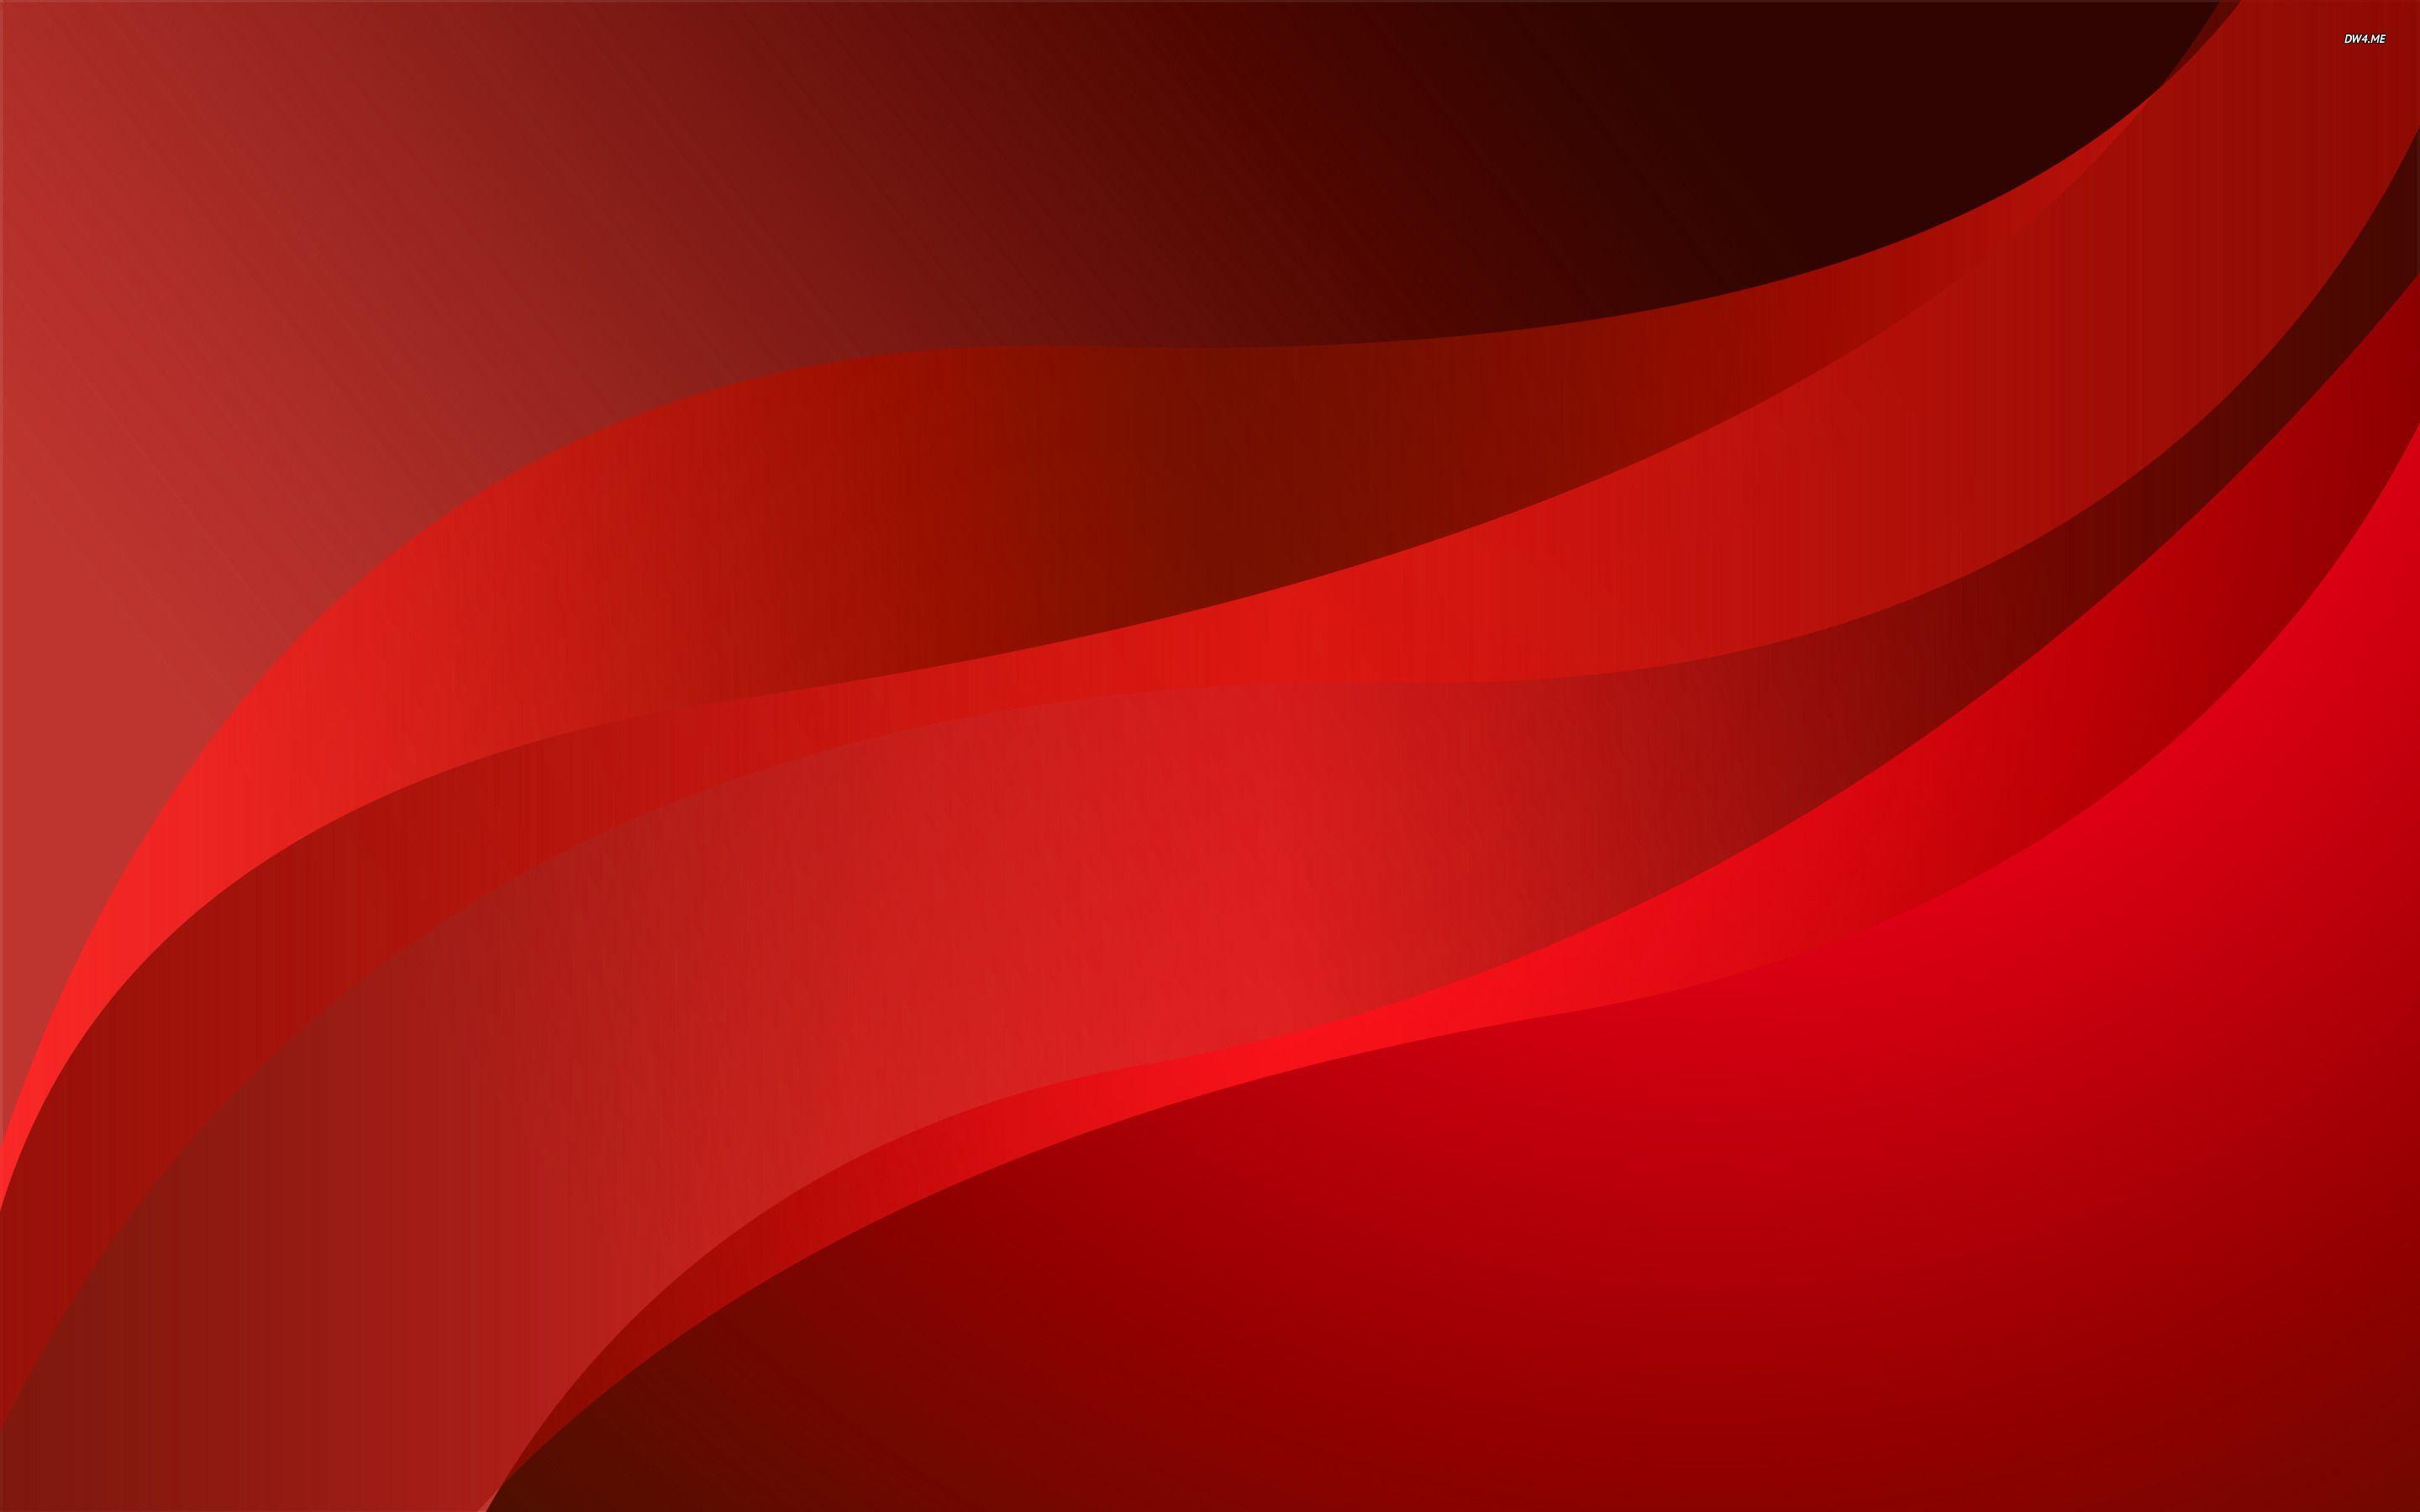 Red And Gold Wallpapers - Wallpaper Cave